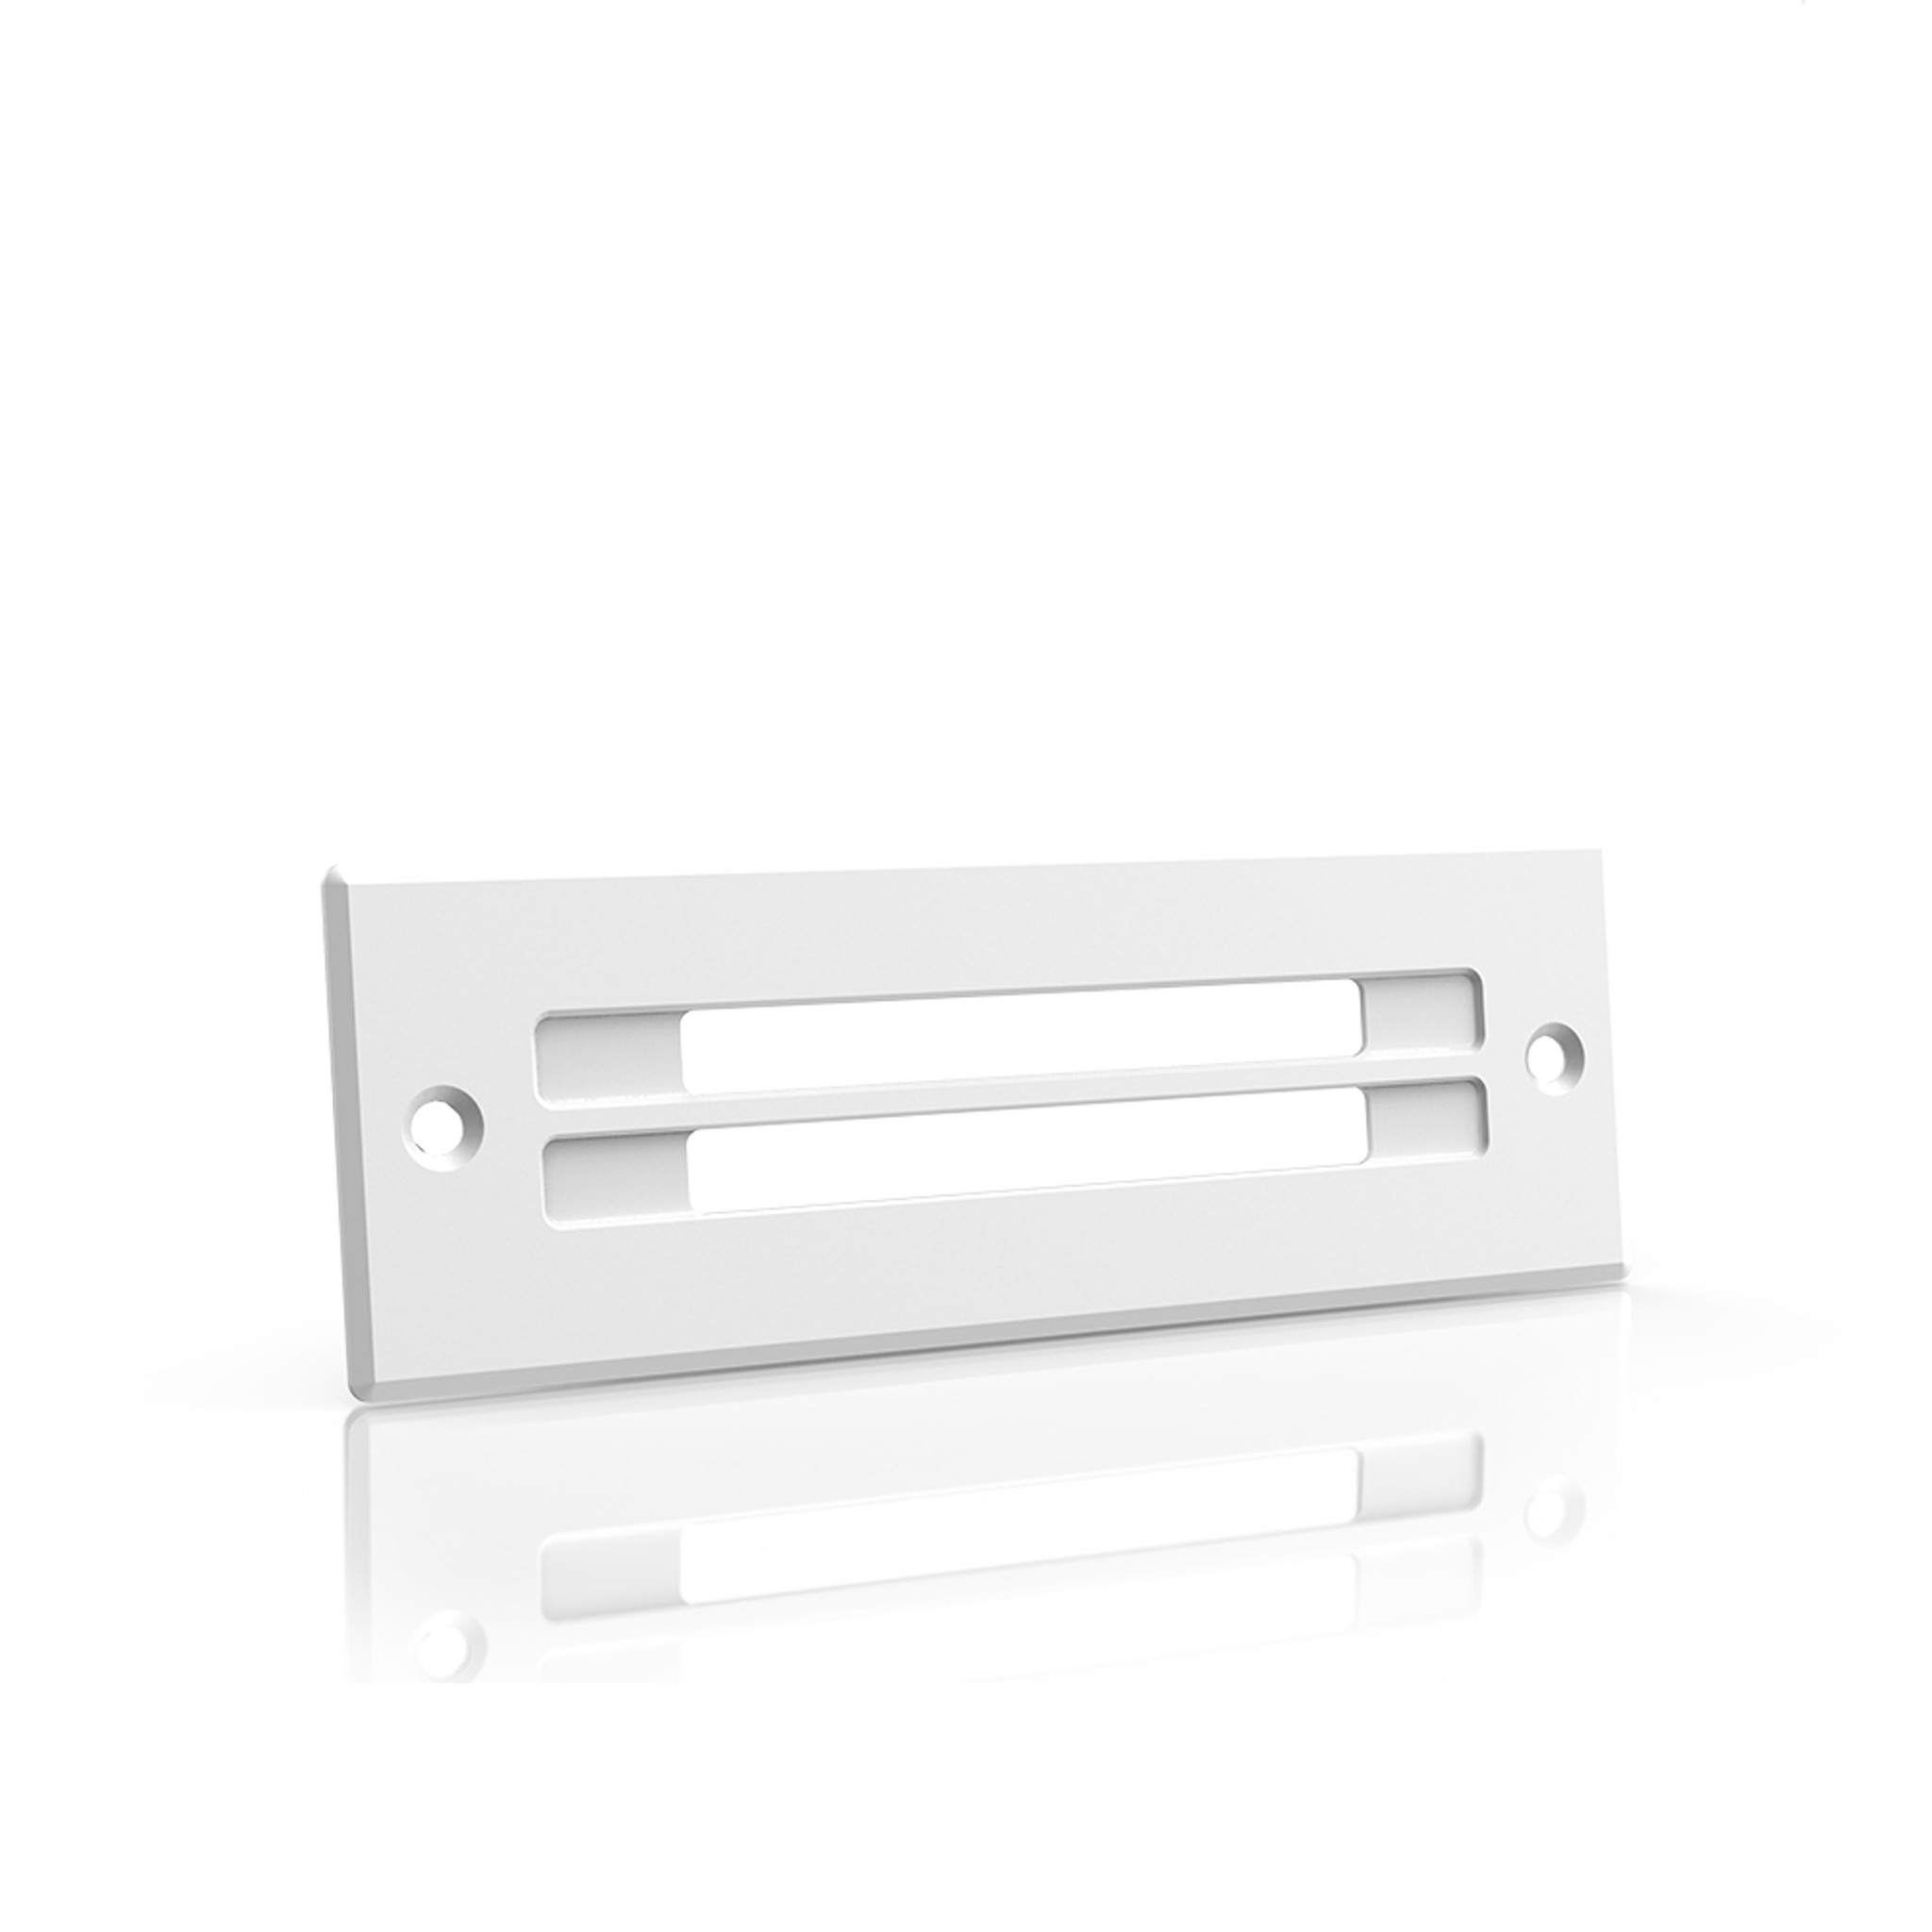 AC INFINITY, Cabinet Ventilation Grille White, 6 Inch Low-Profile